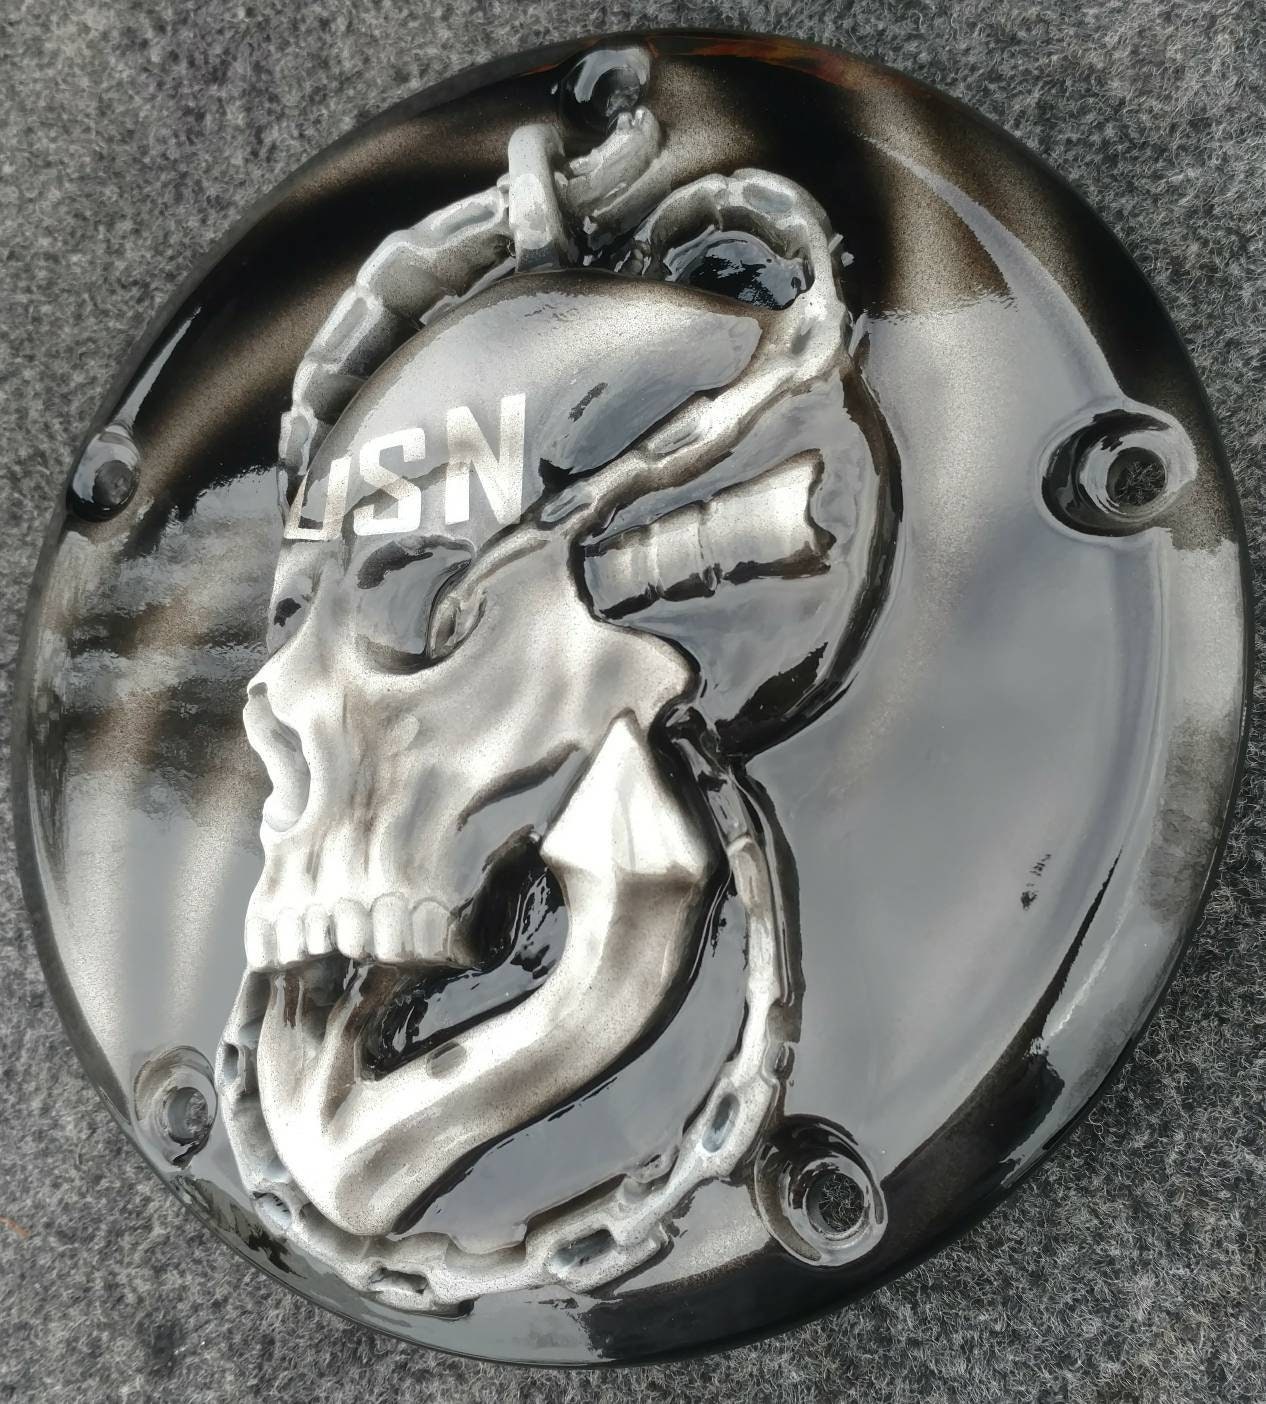 3D US Navy skull and anchor on a Harley-Davidson derby clutch cover